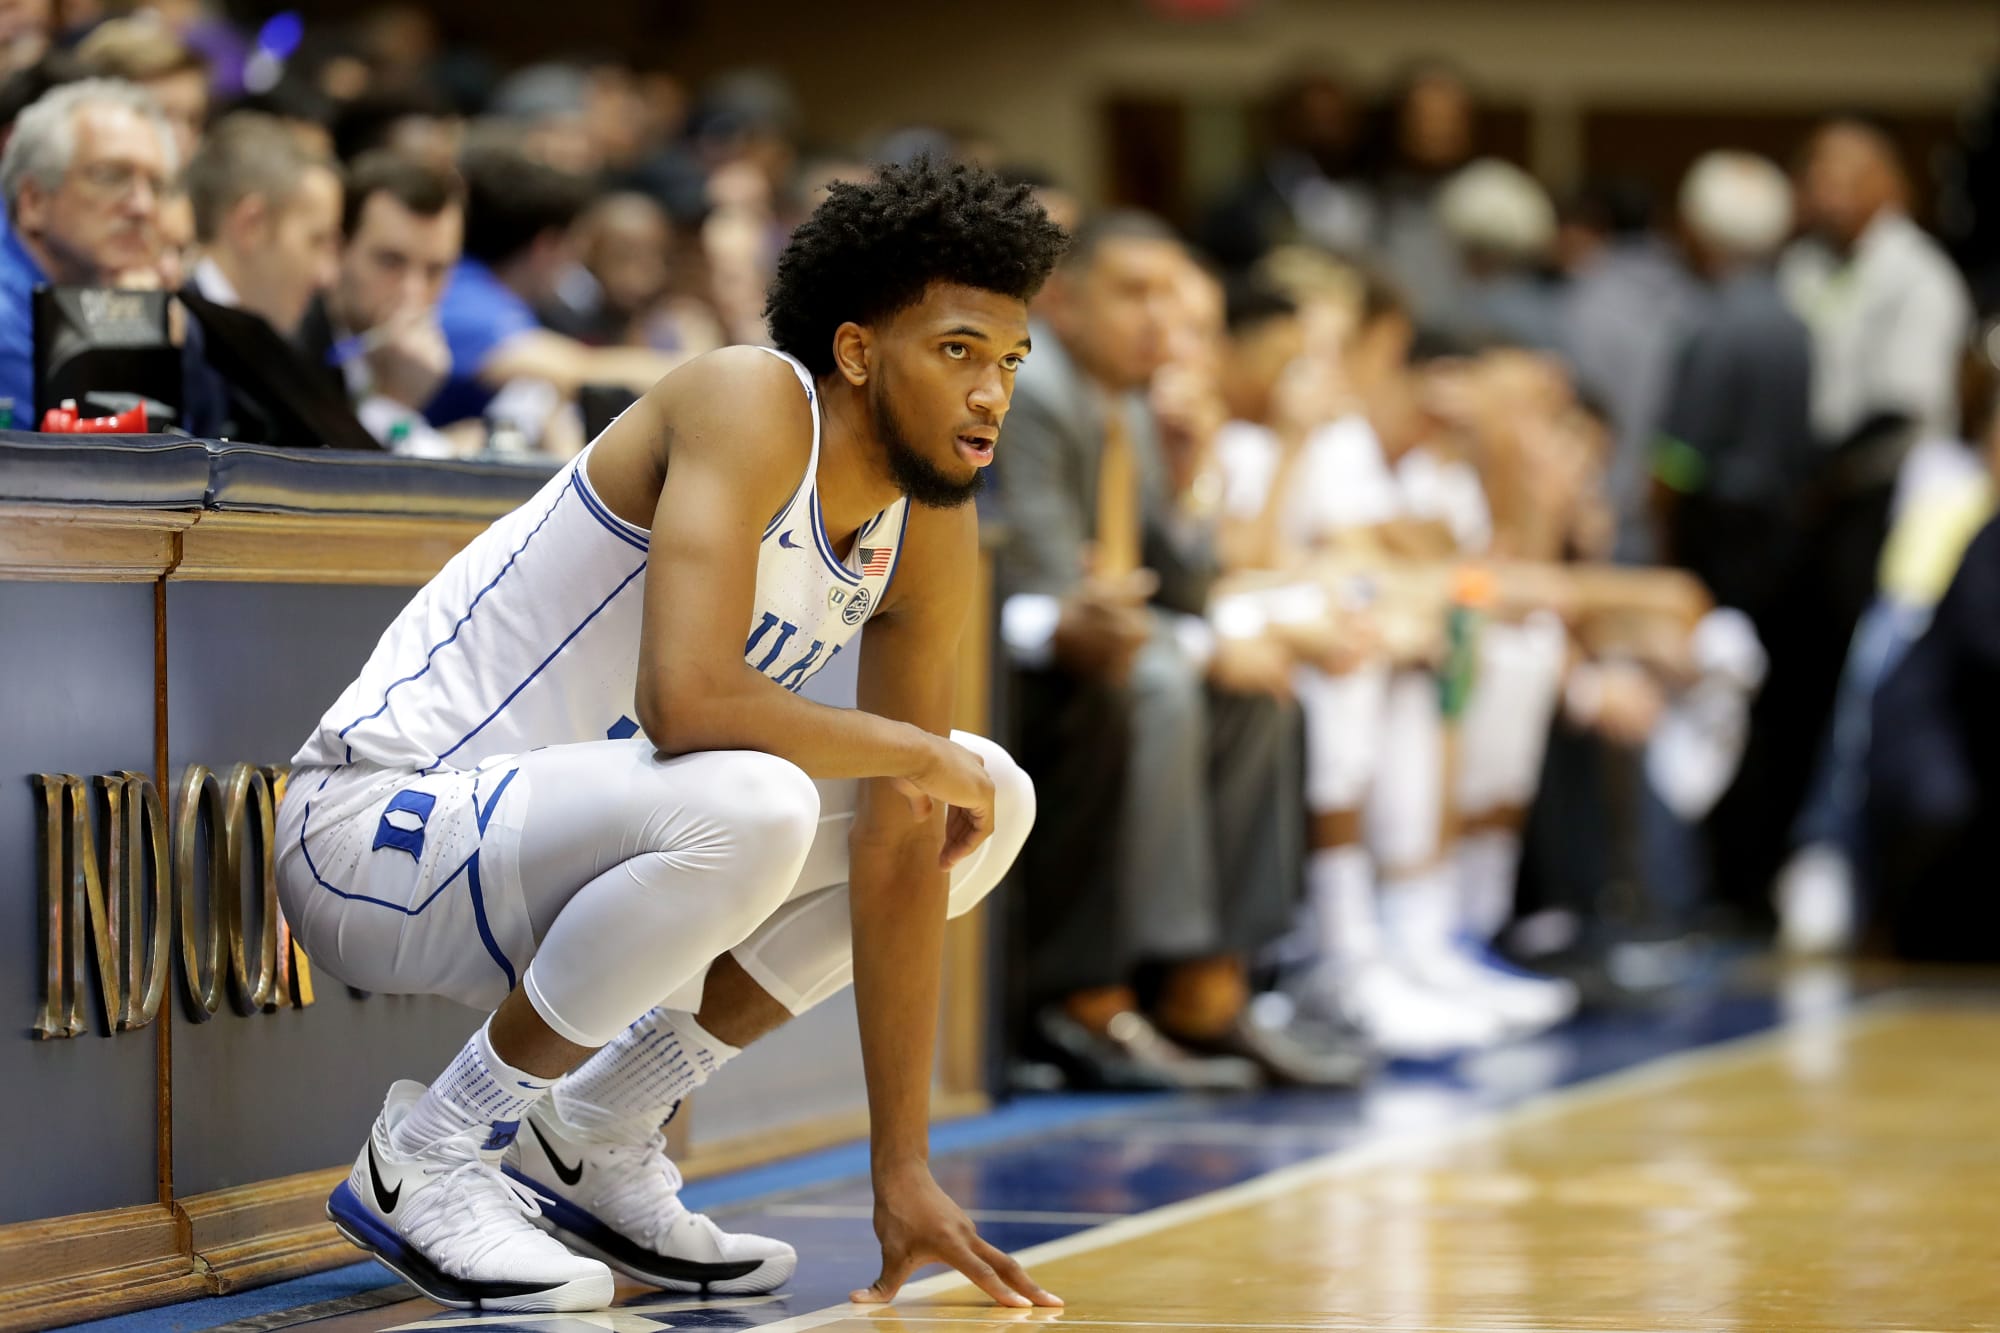 Duke MBB: How to Recover from the First Loss of the Season